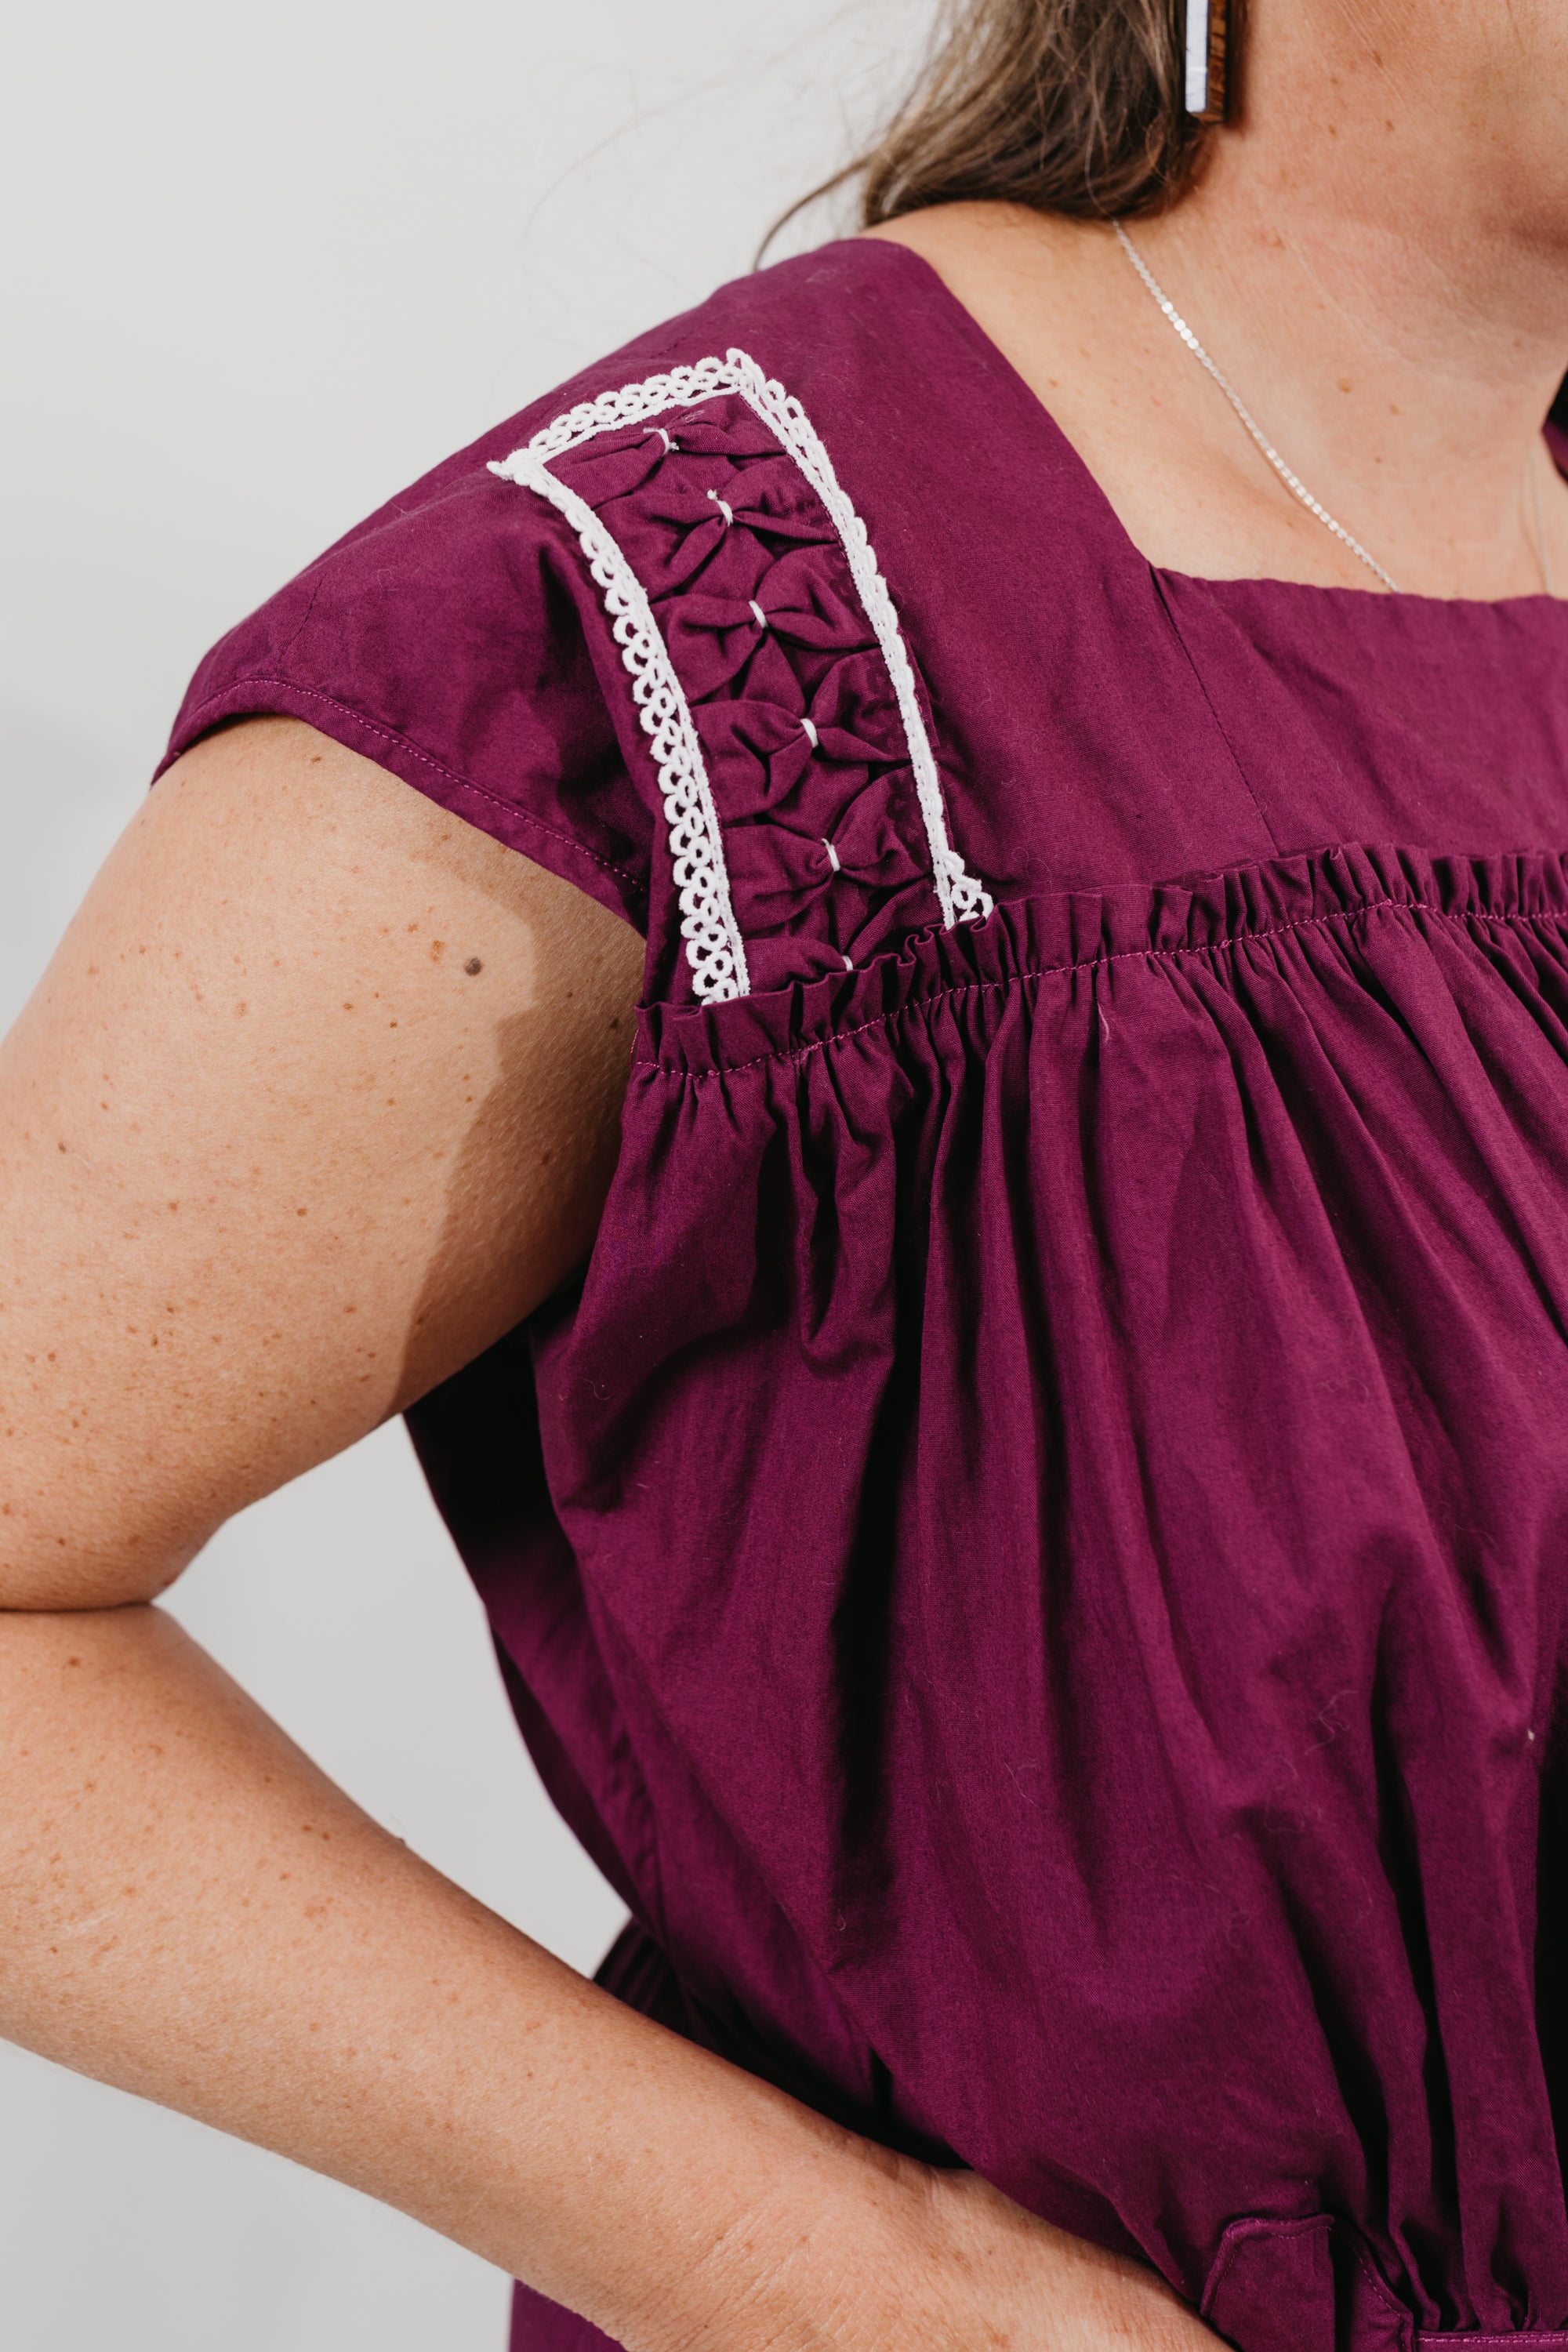 Close up of the shoulder embellishments - White woman wearing a purple sleeveless dress with embroidery at the shoulder yokes.  Standing in front of a white background.  